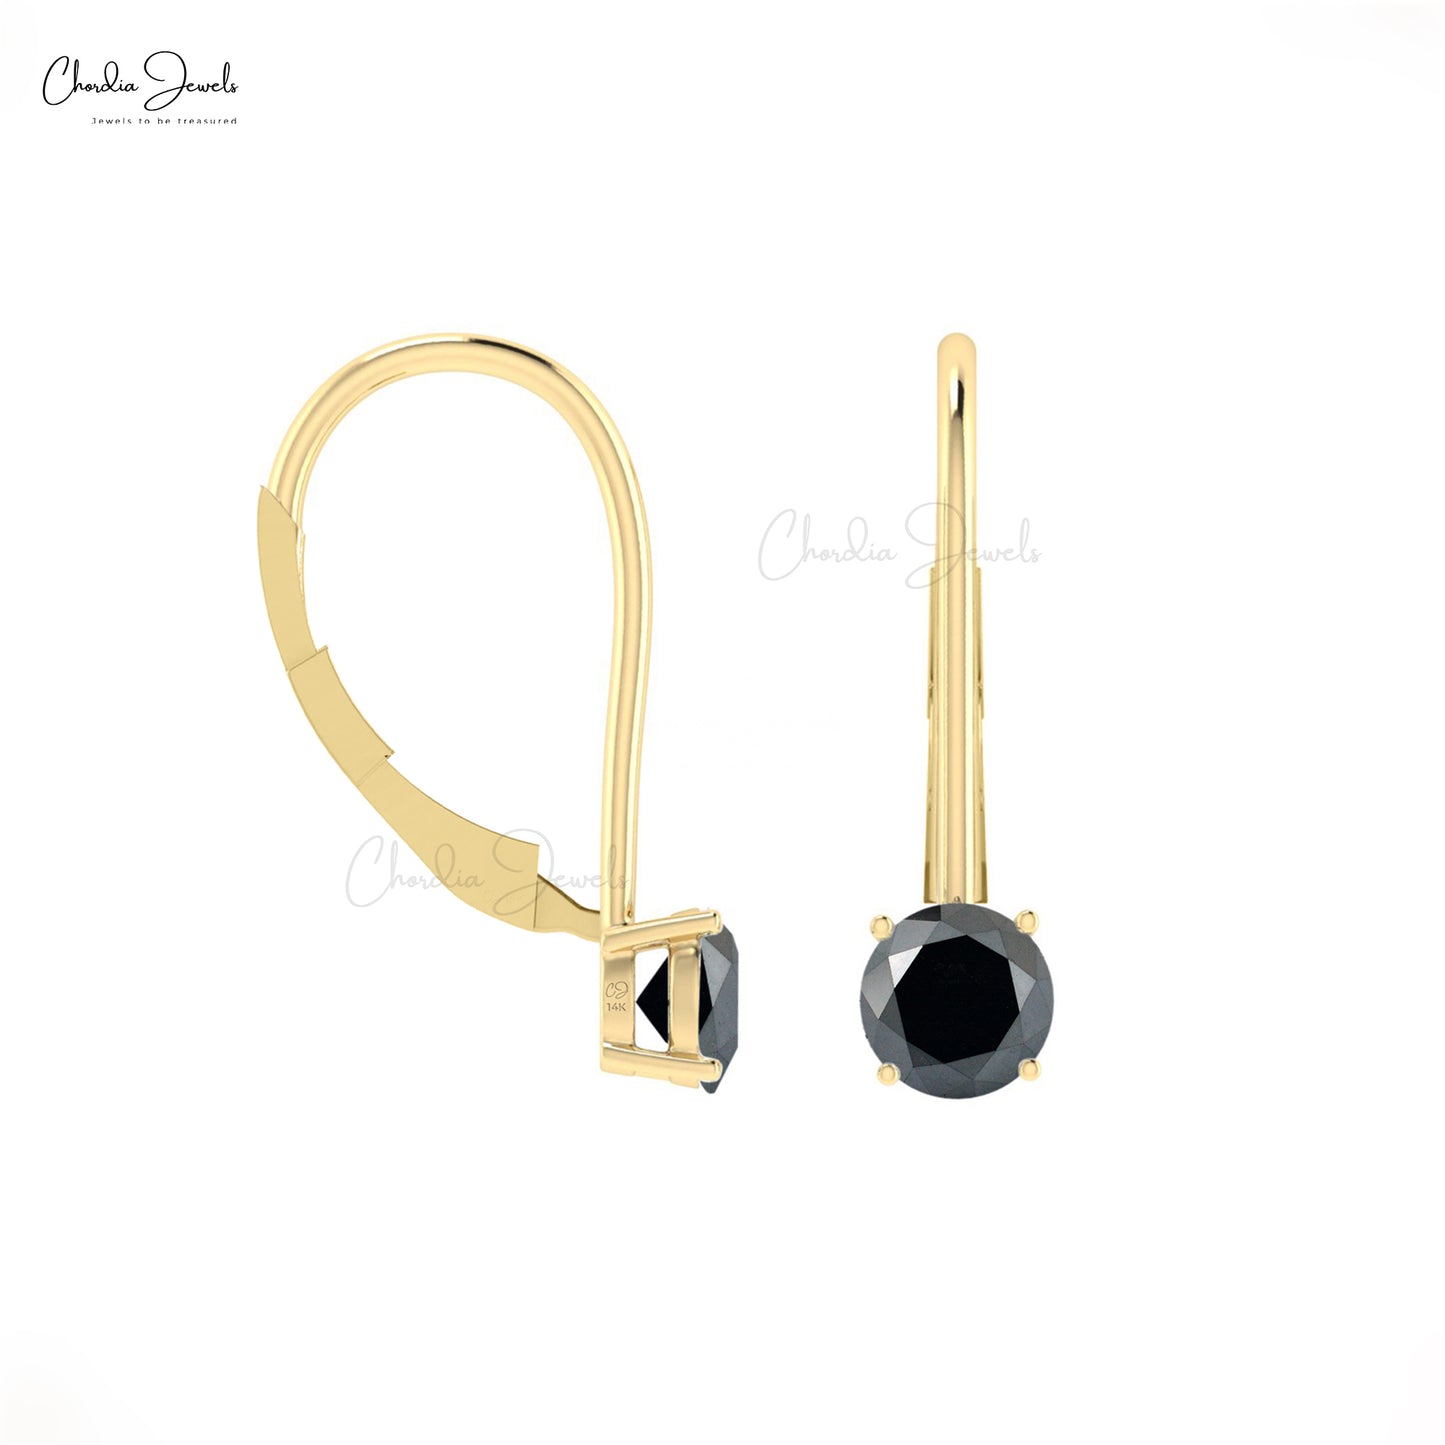 Authentic Black Diamond 5mm Round Shape Dangling Earrings 14k Solid Gold April Birthstone Prong Set Earrings Light Weight Jewelry